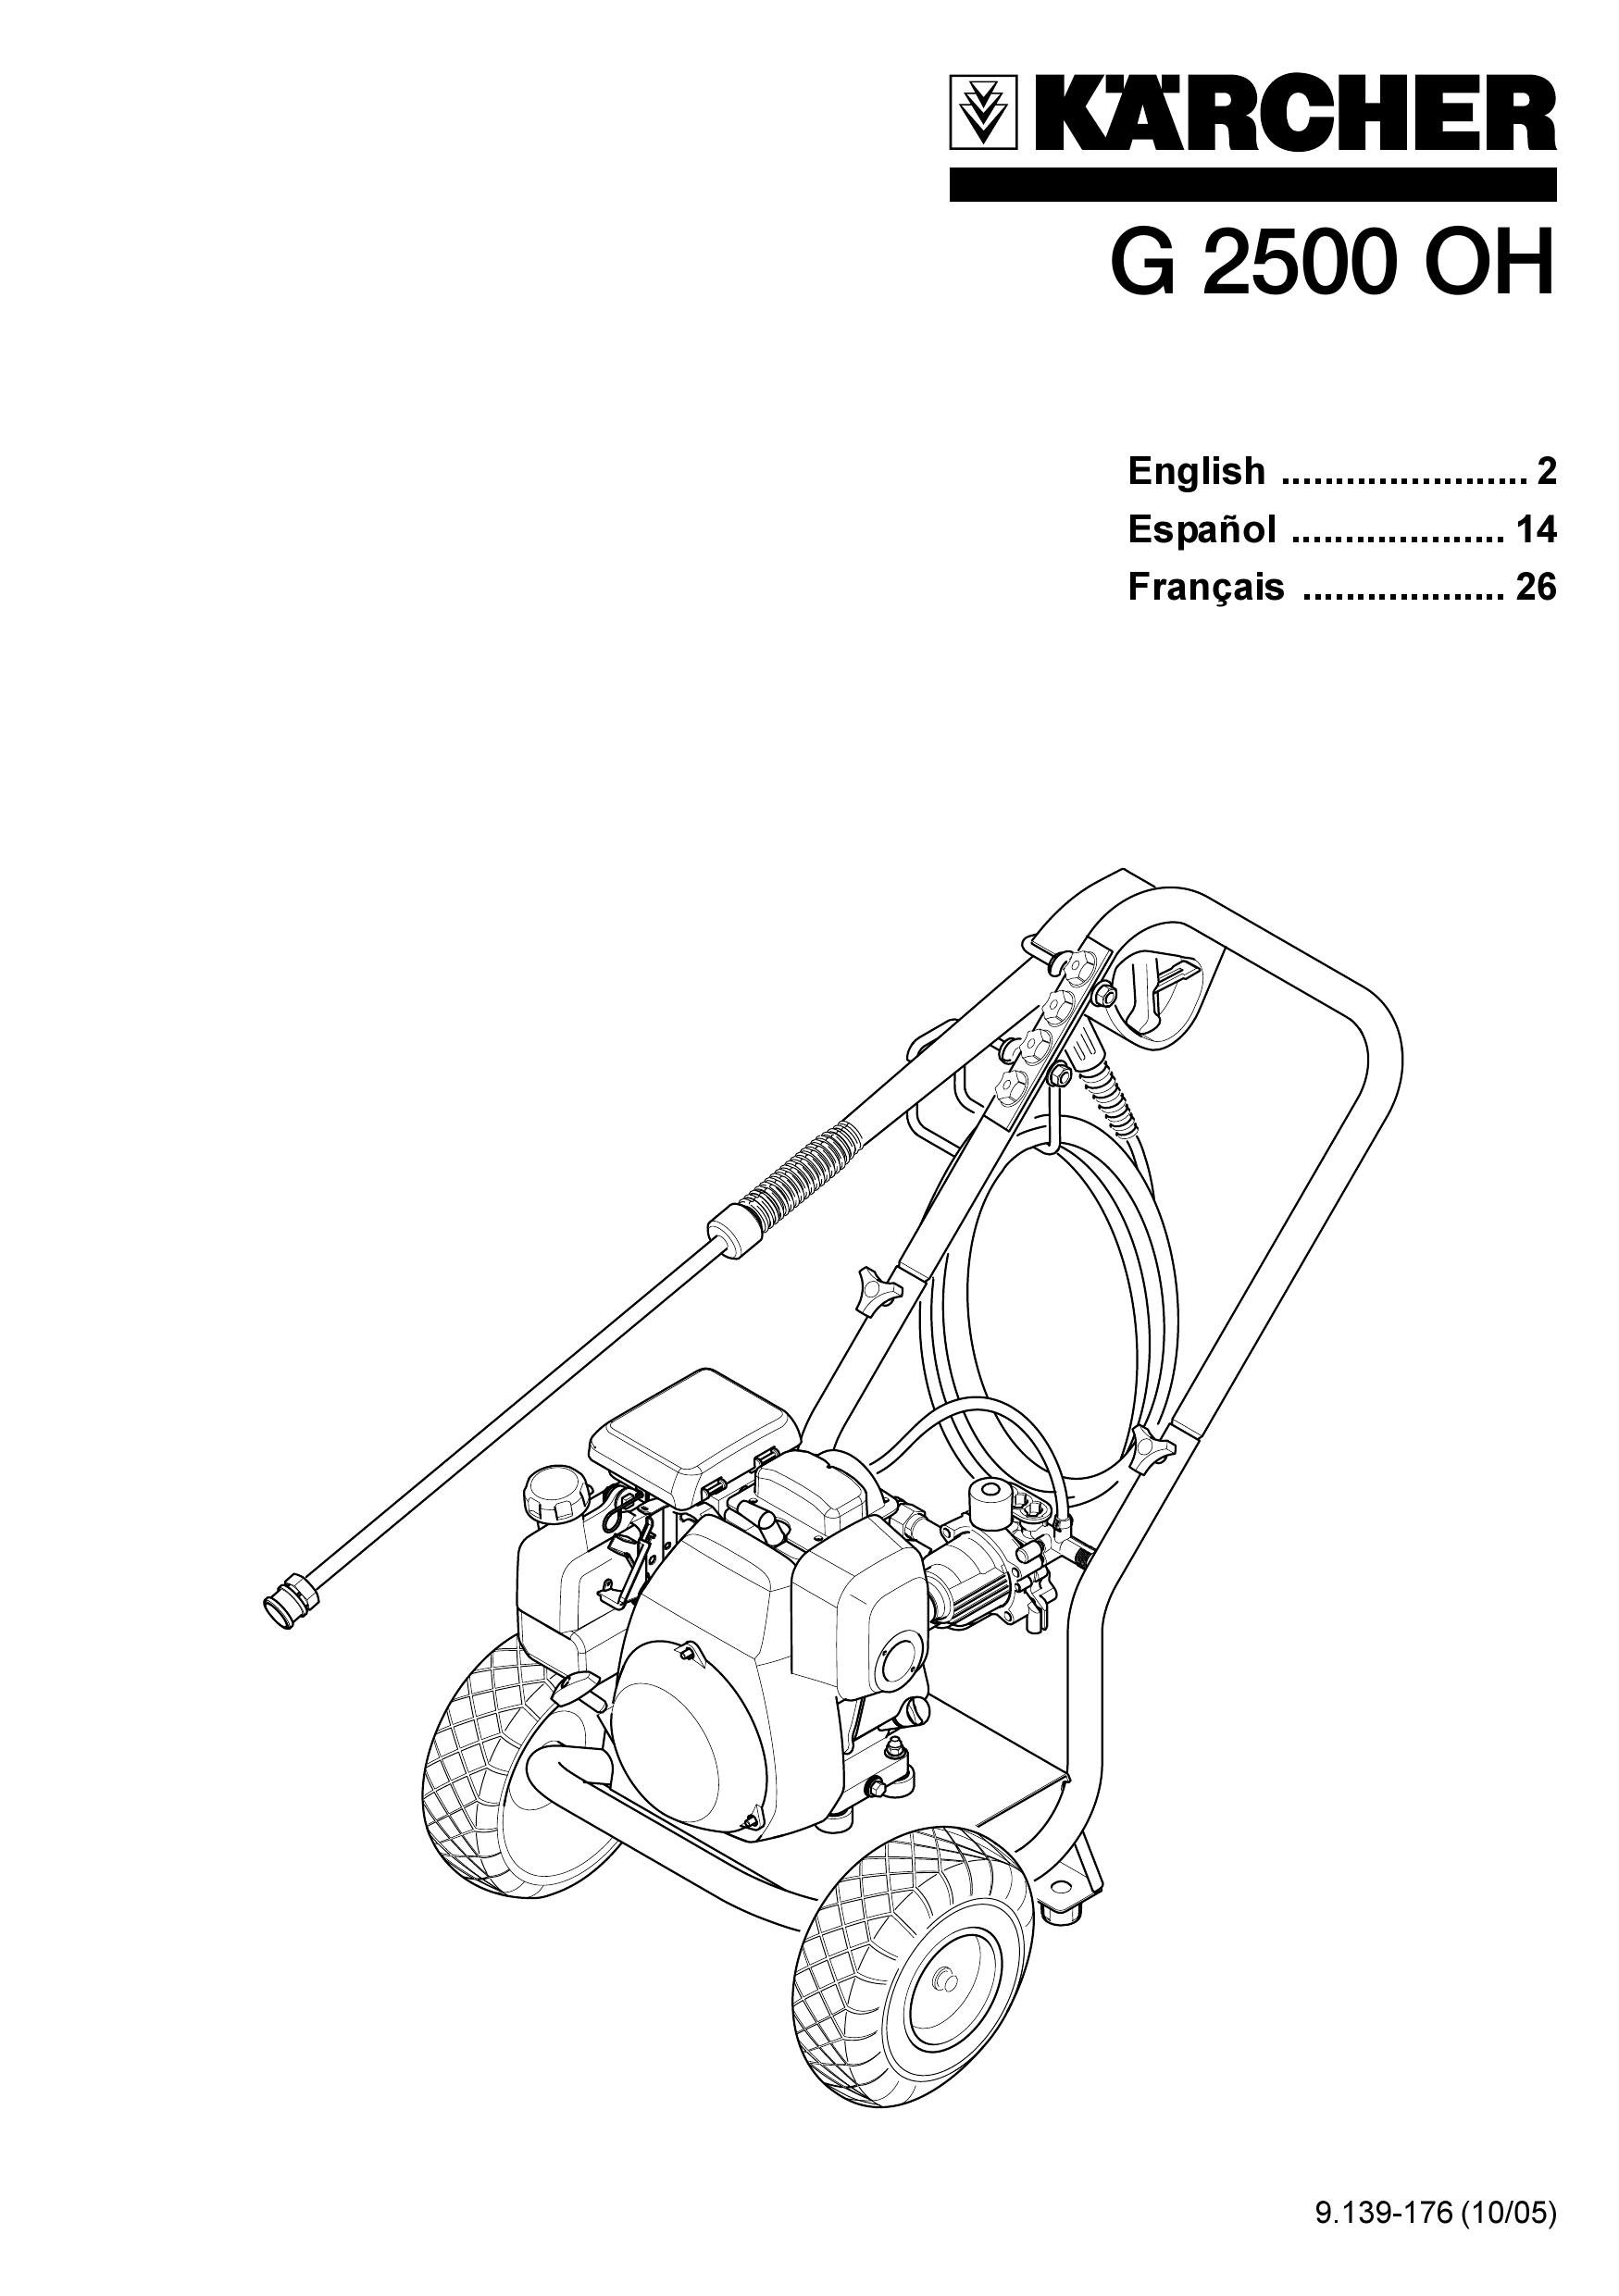 Karcher G 2500 OH Lawn Mower User Manual